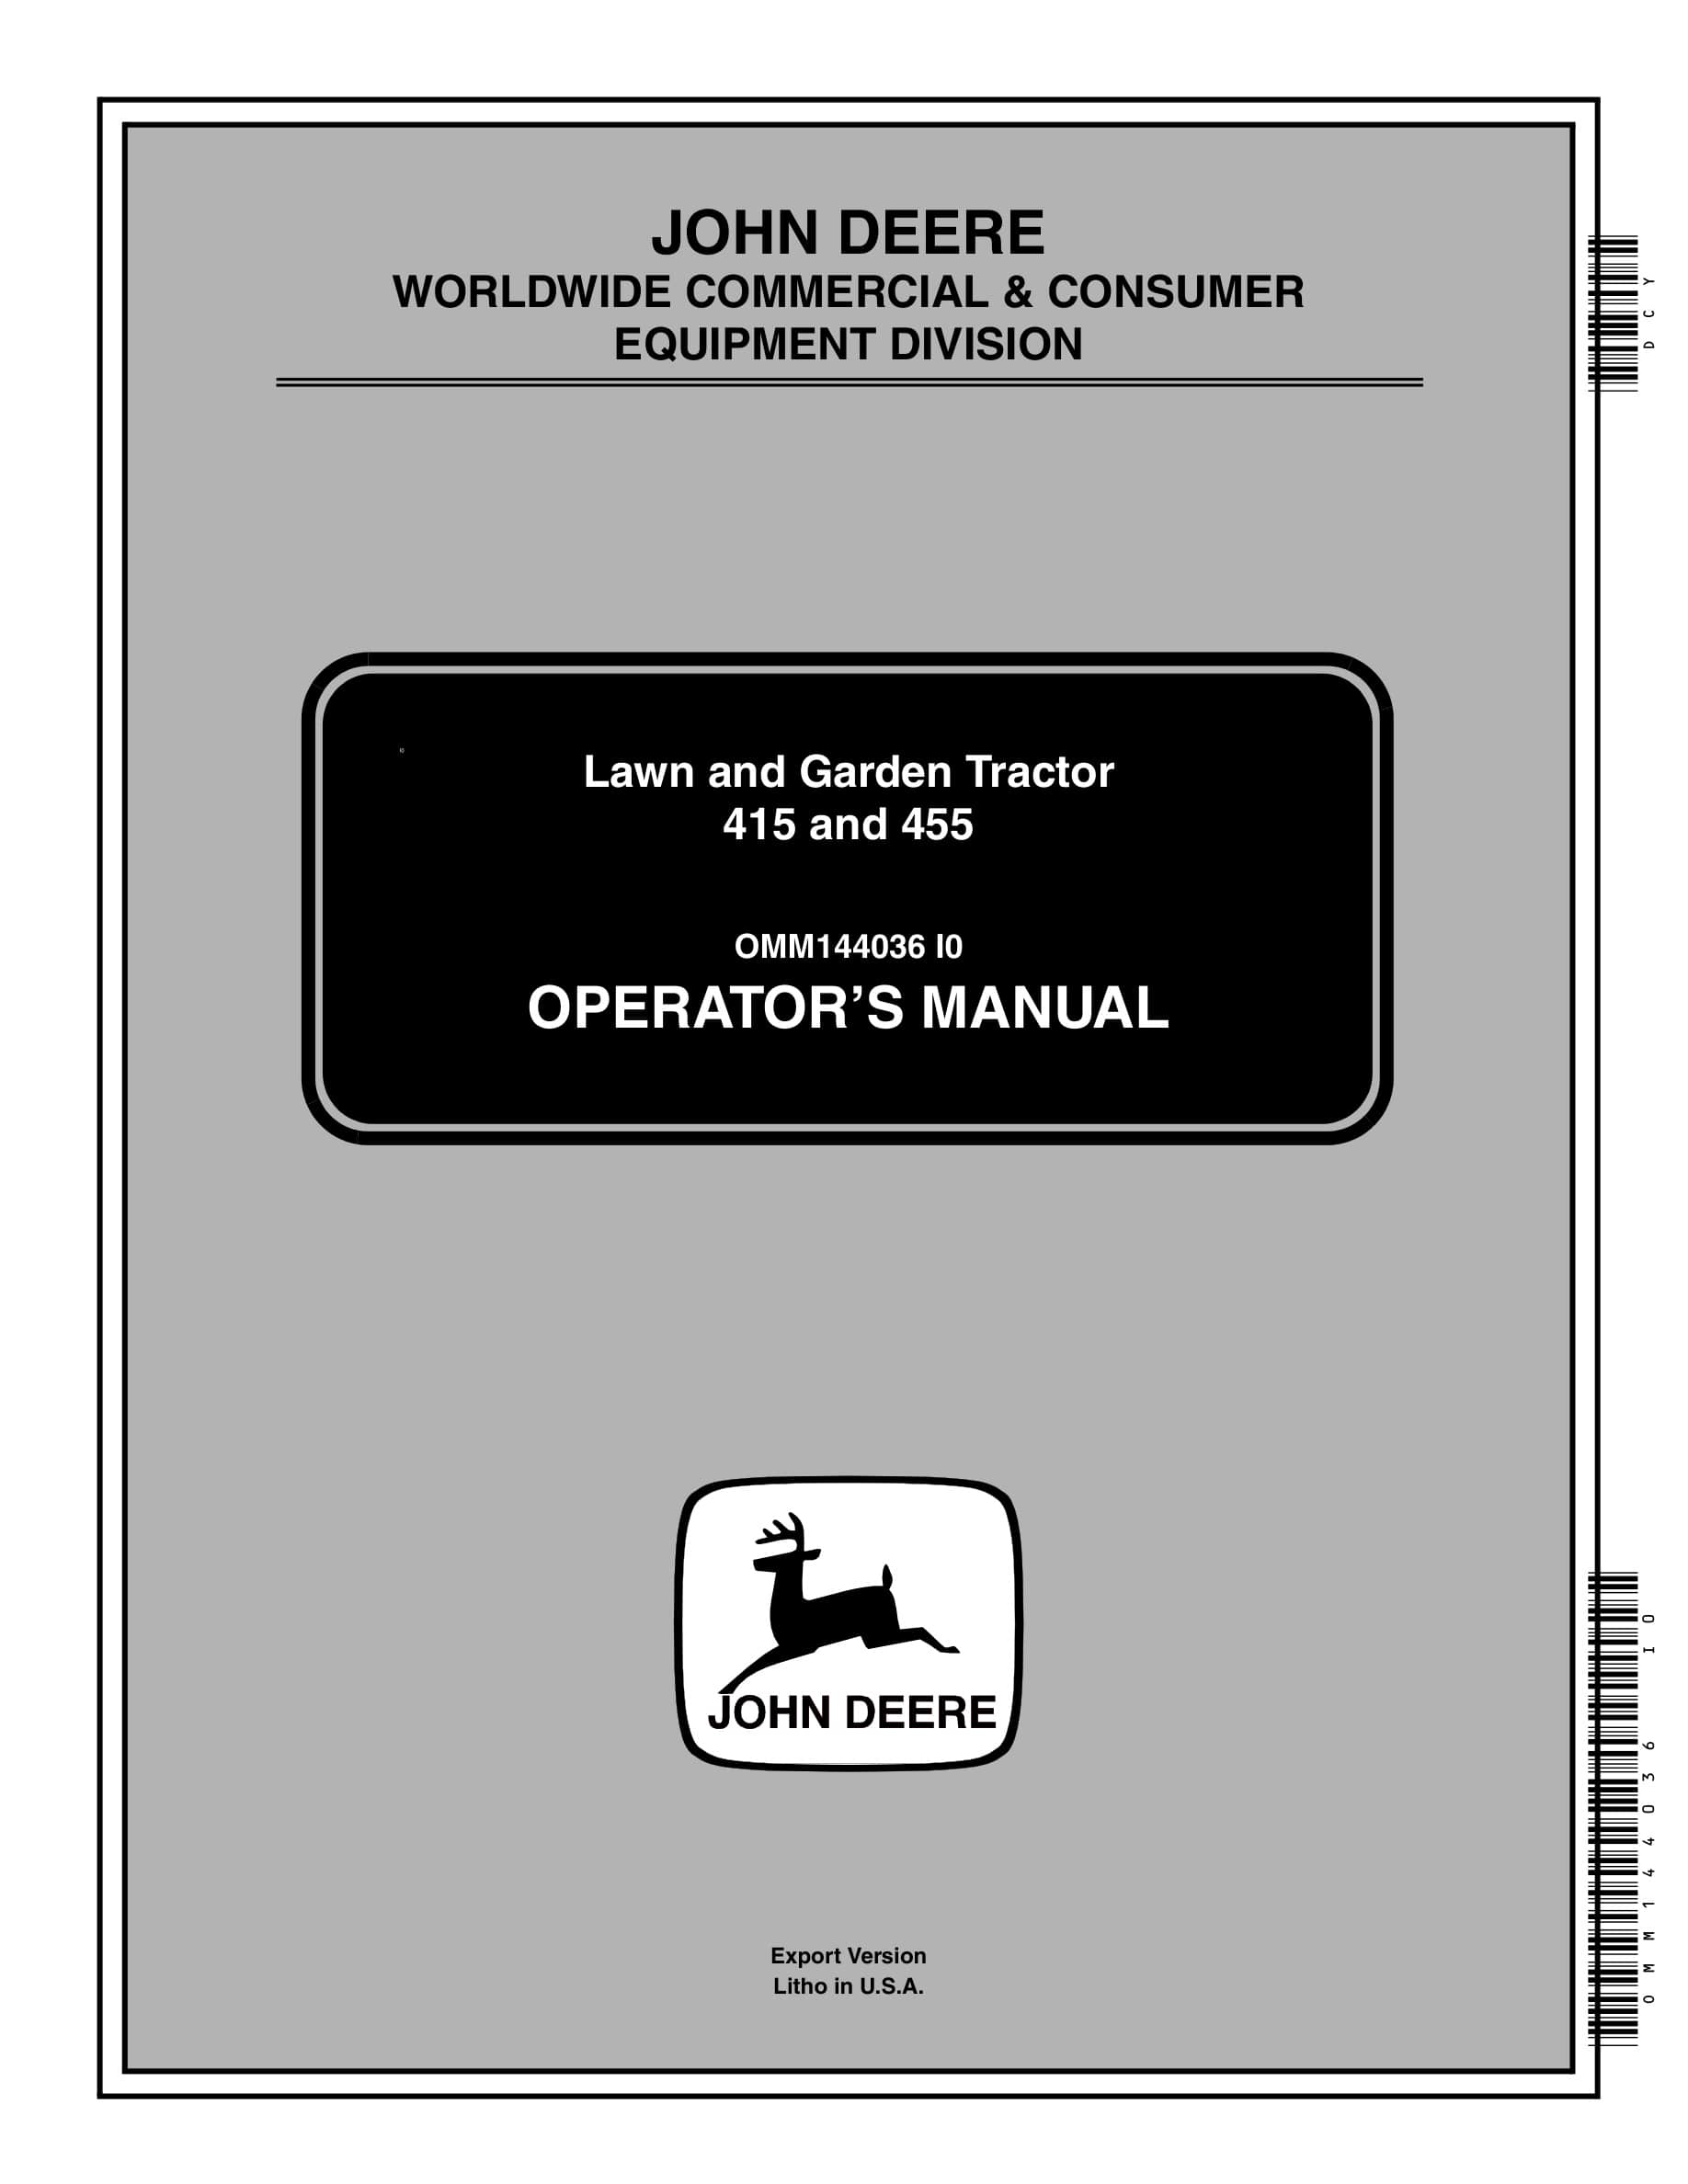 John Deere 415 And 455 Lawn And Garden Tractors Operator Manual OMM144036-1